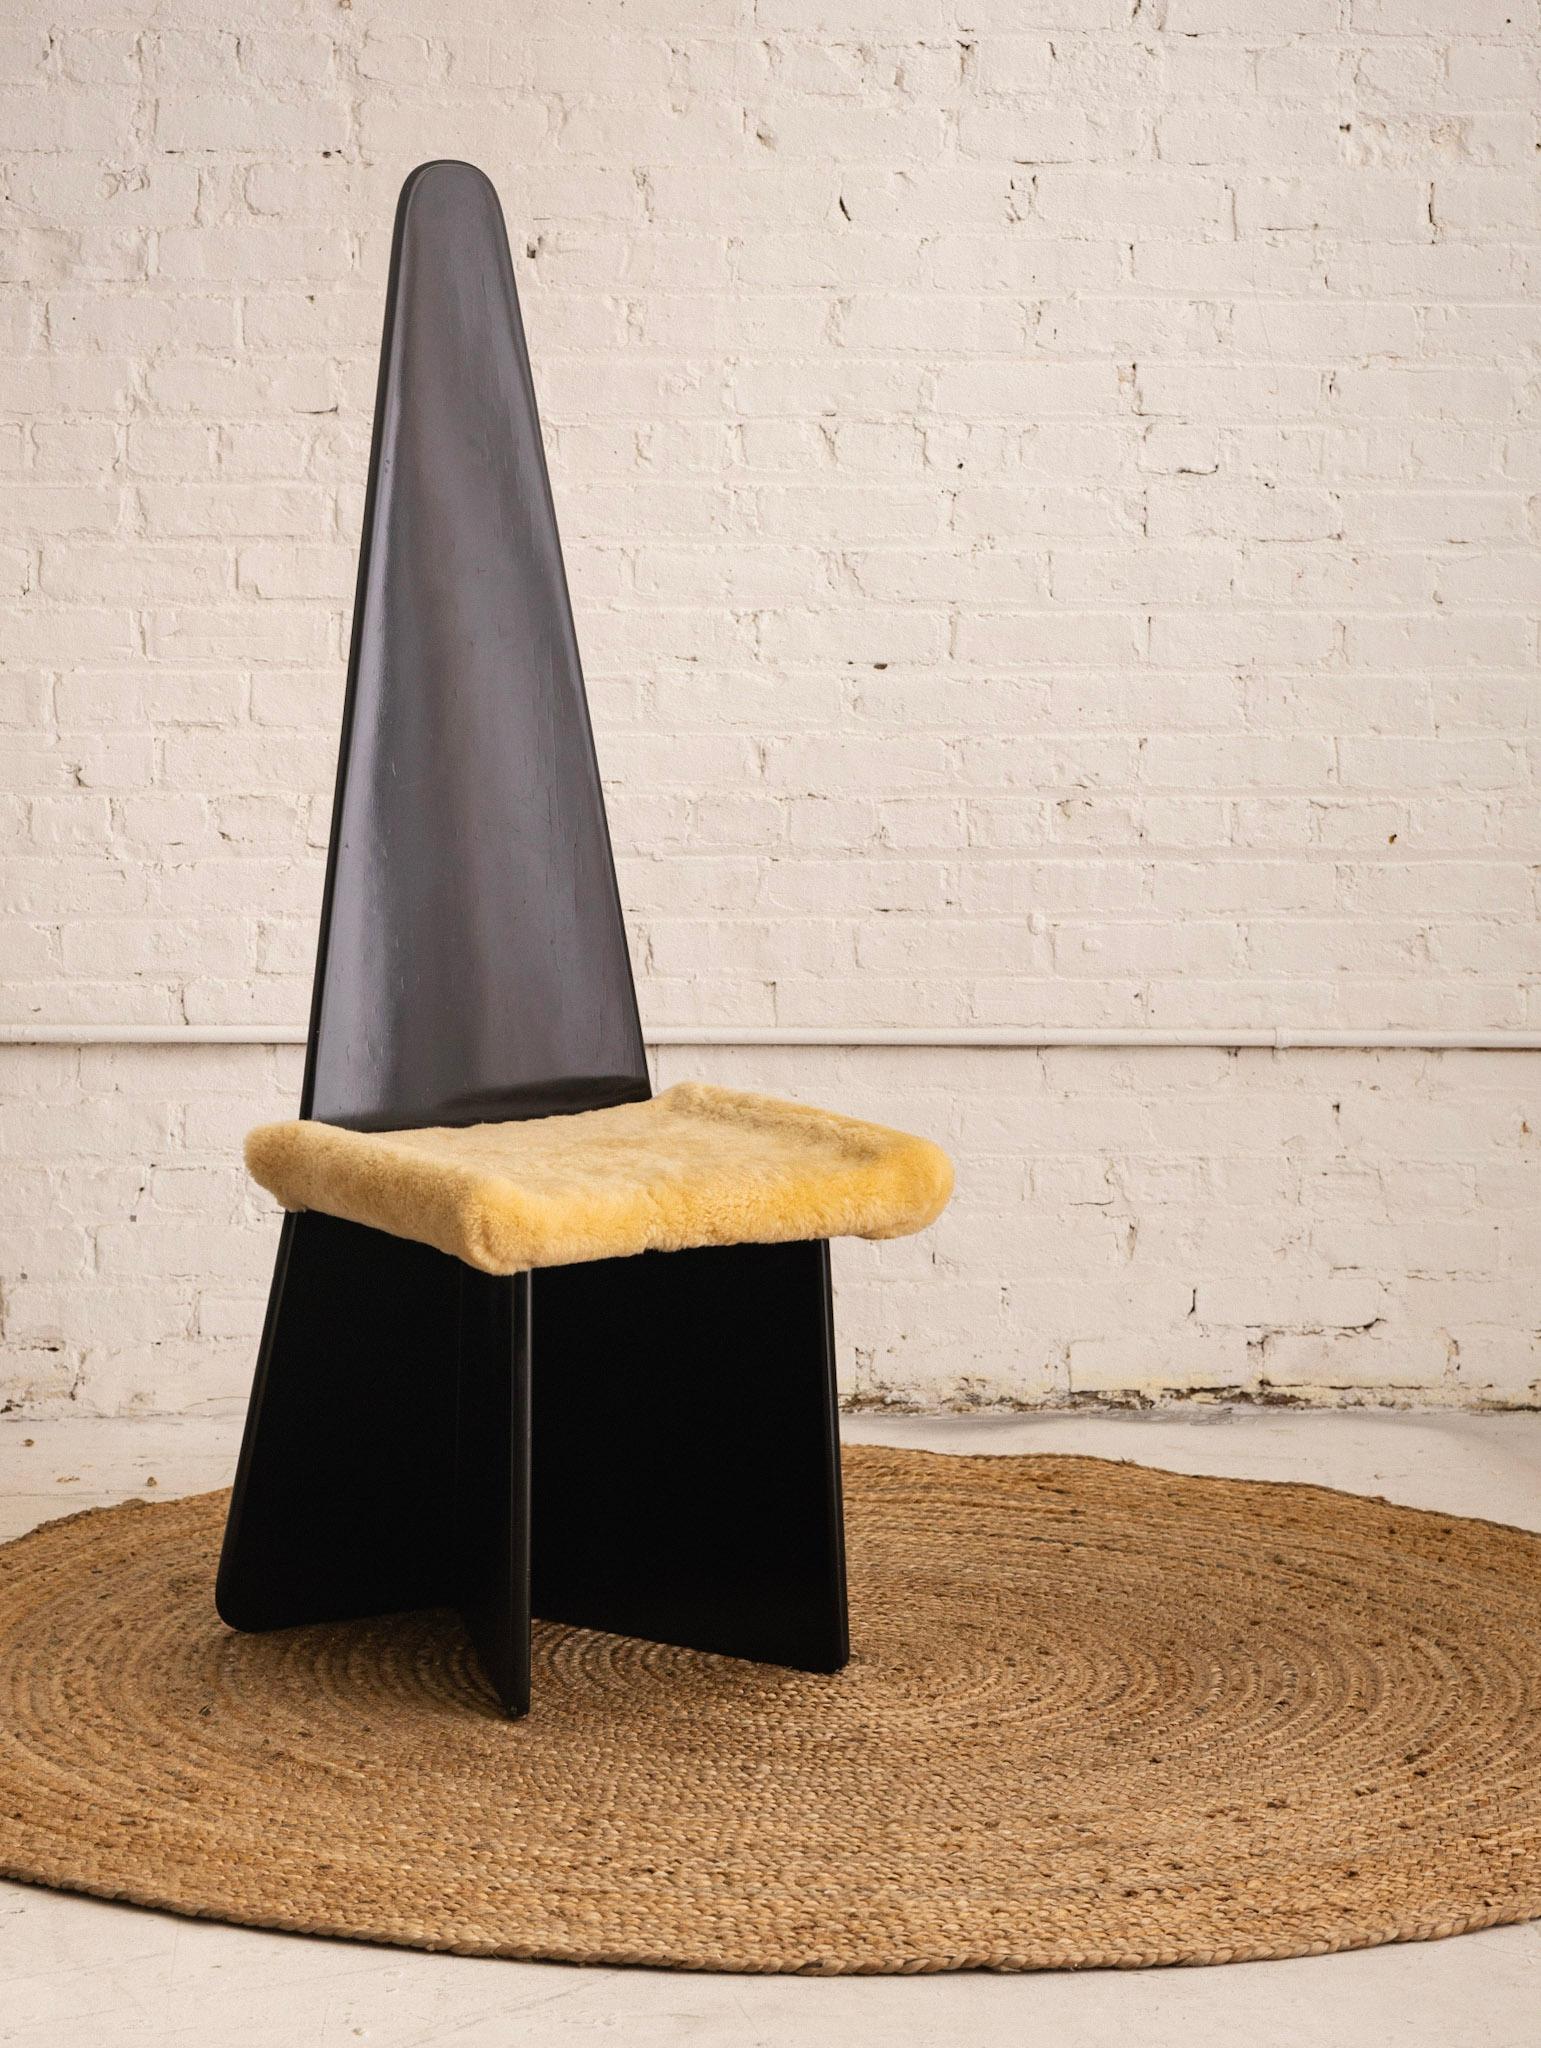 Antonio Ronchetti for Sormani, Italy, black lacquered chair. Pyramid silhouette. Shearling upholstery. Retains original 